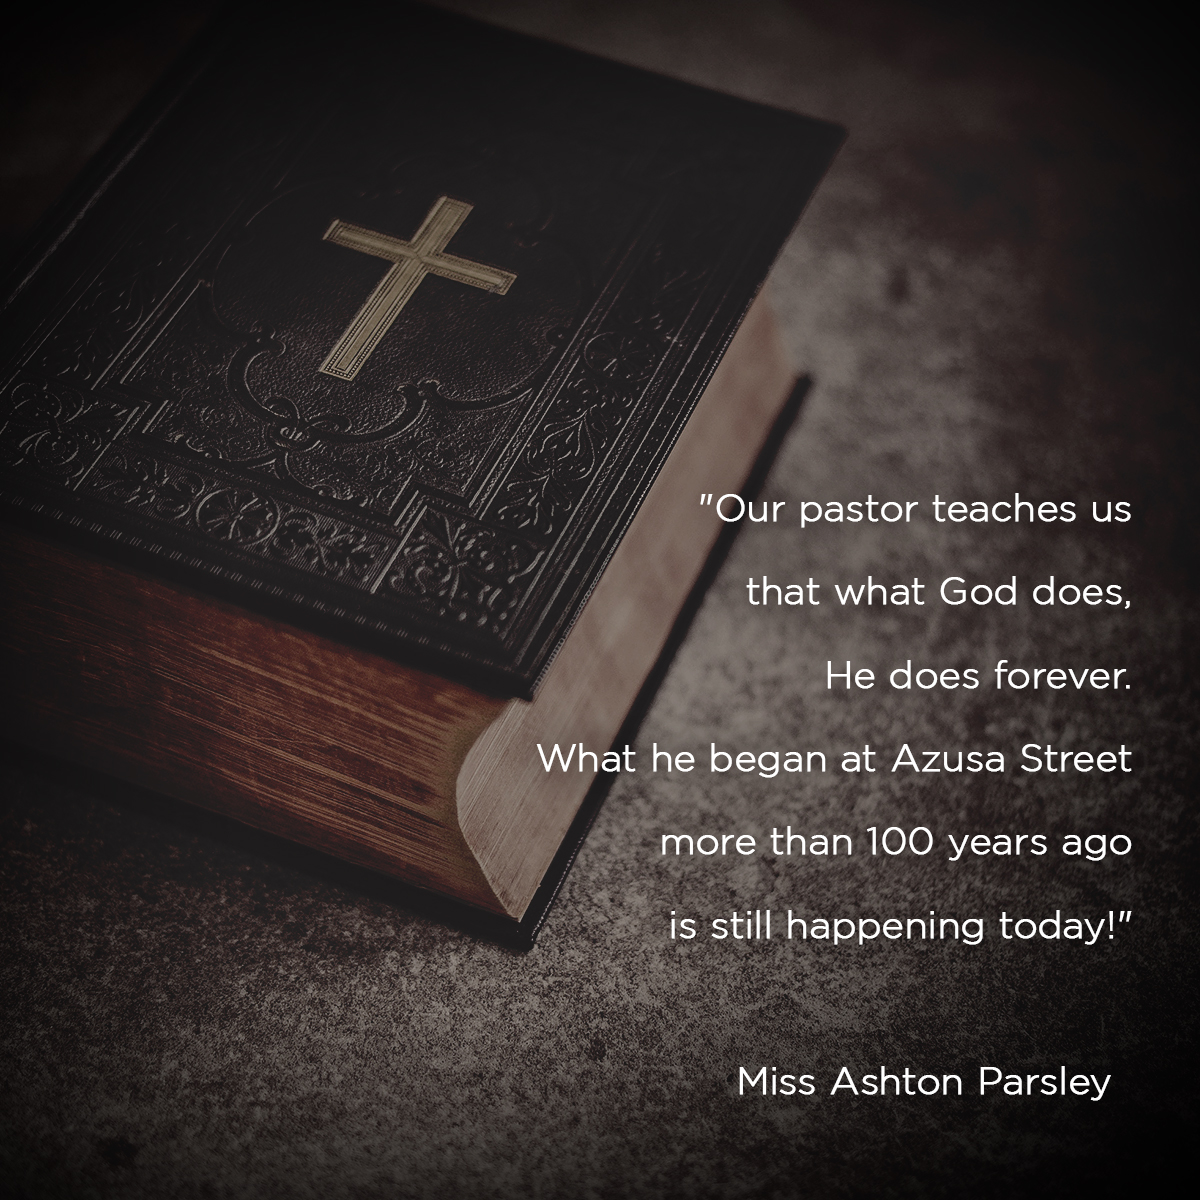 “Our pastor teaches us that what God does, He does forever. What he began at Azusa Street more than 100 years ago is still happening today!” – Miss Ashton Parsley